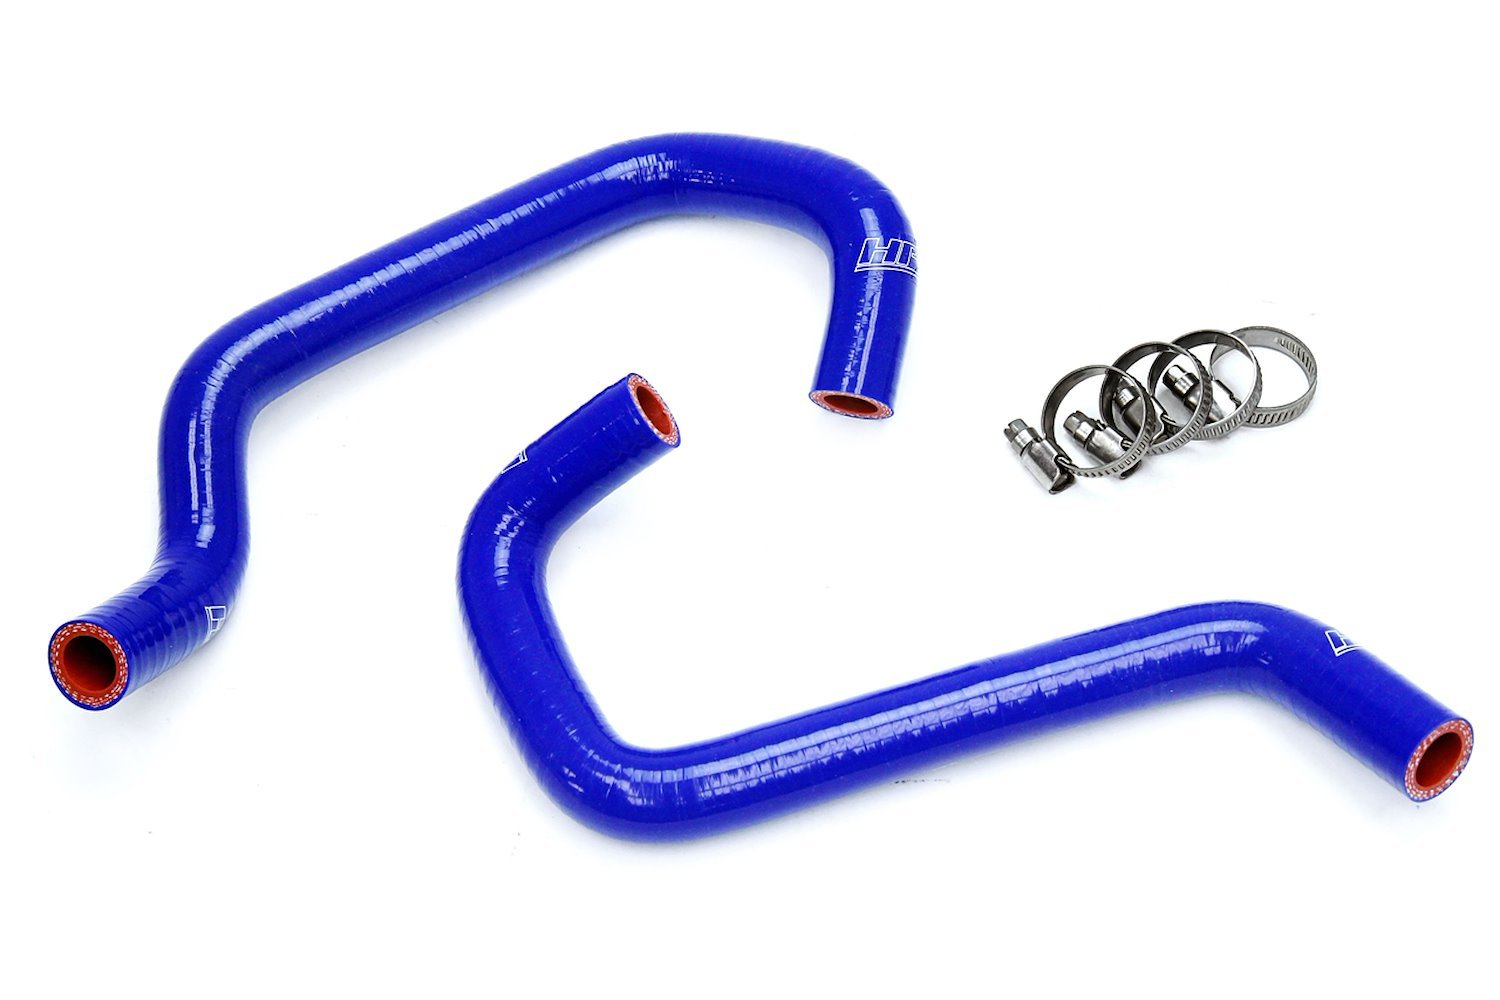 57-1701-BLUE Heater Hose Kit, High-Temp 3-Ply Reinforced Silicone, Replace OEM Rubber Heater Coolant Hoses